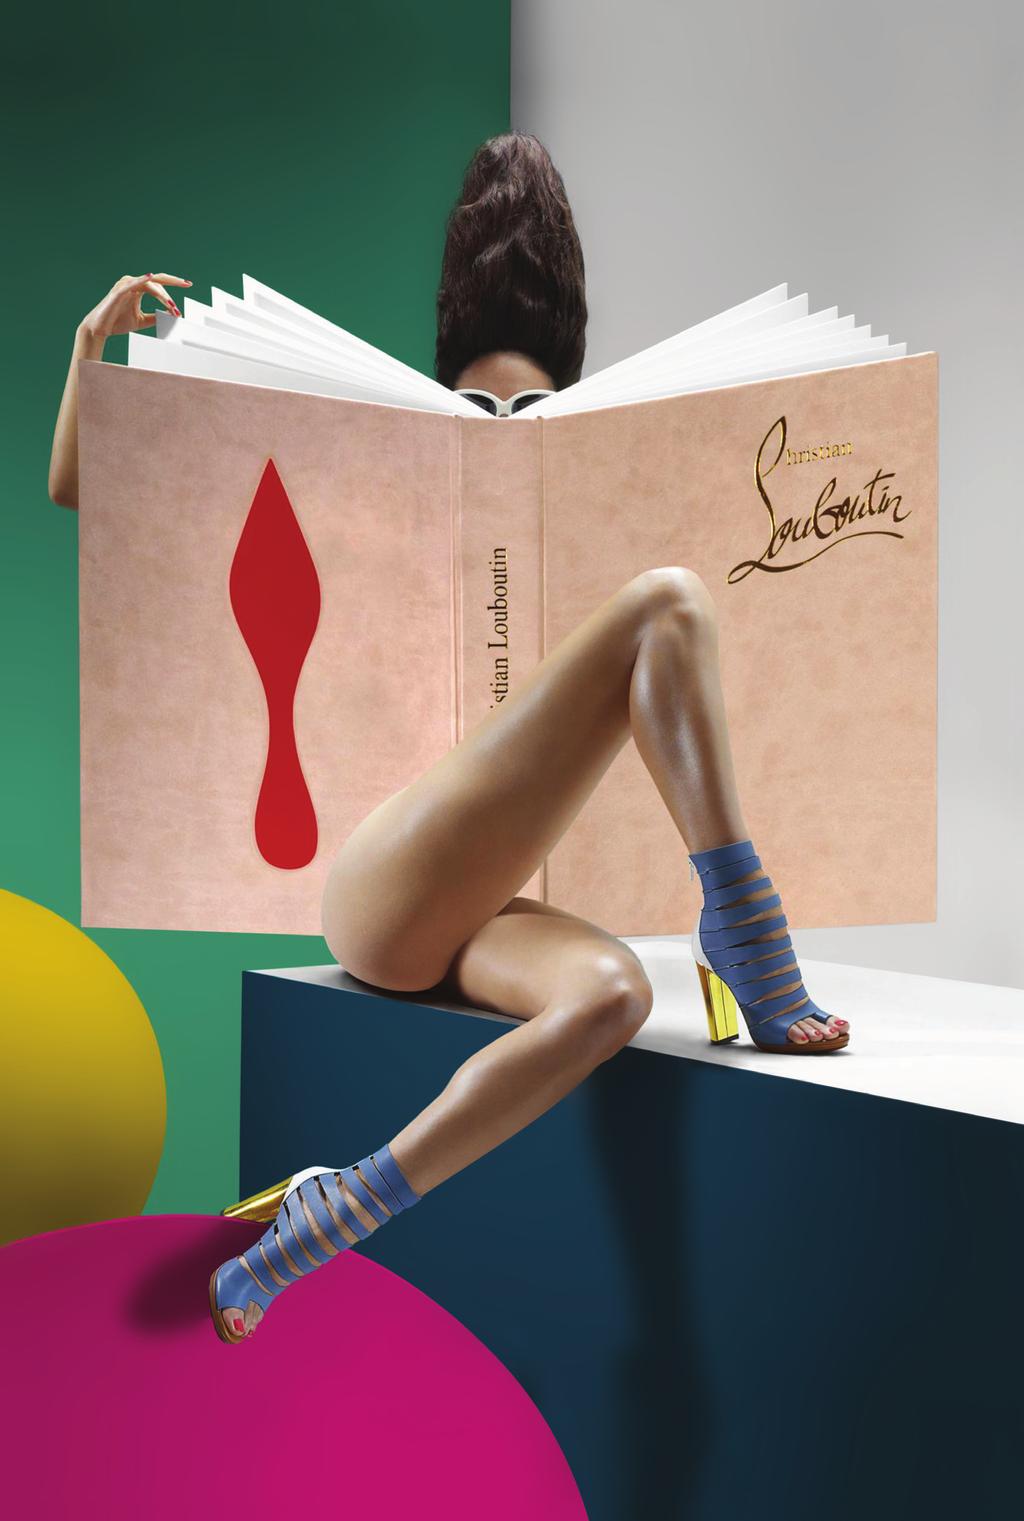 Christian Louboutin Presented by June 20 through September 15 A touring